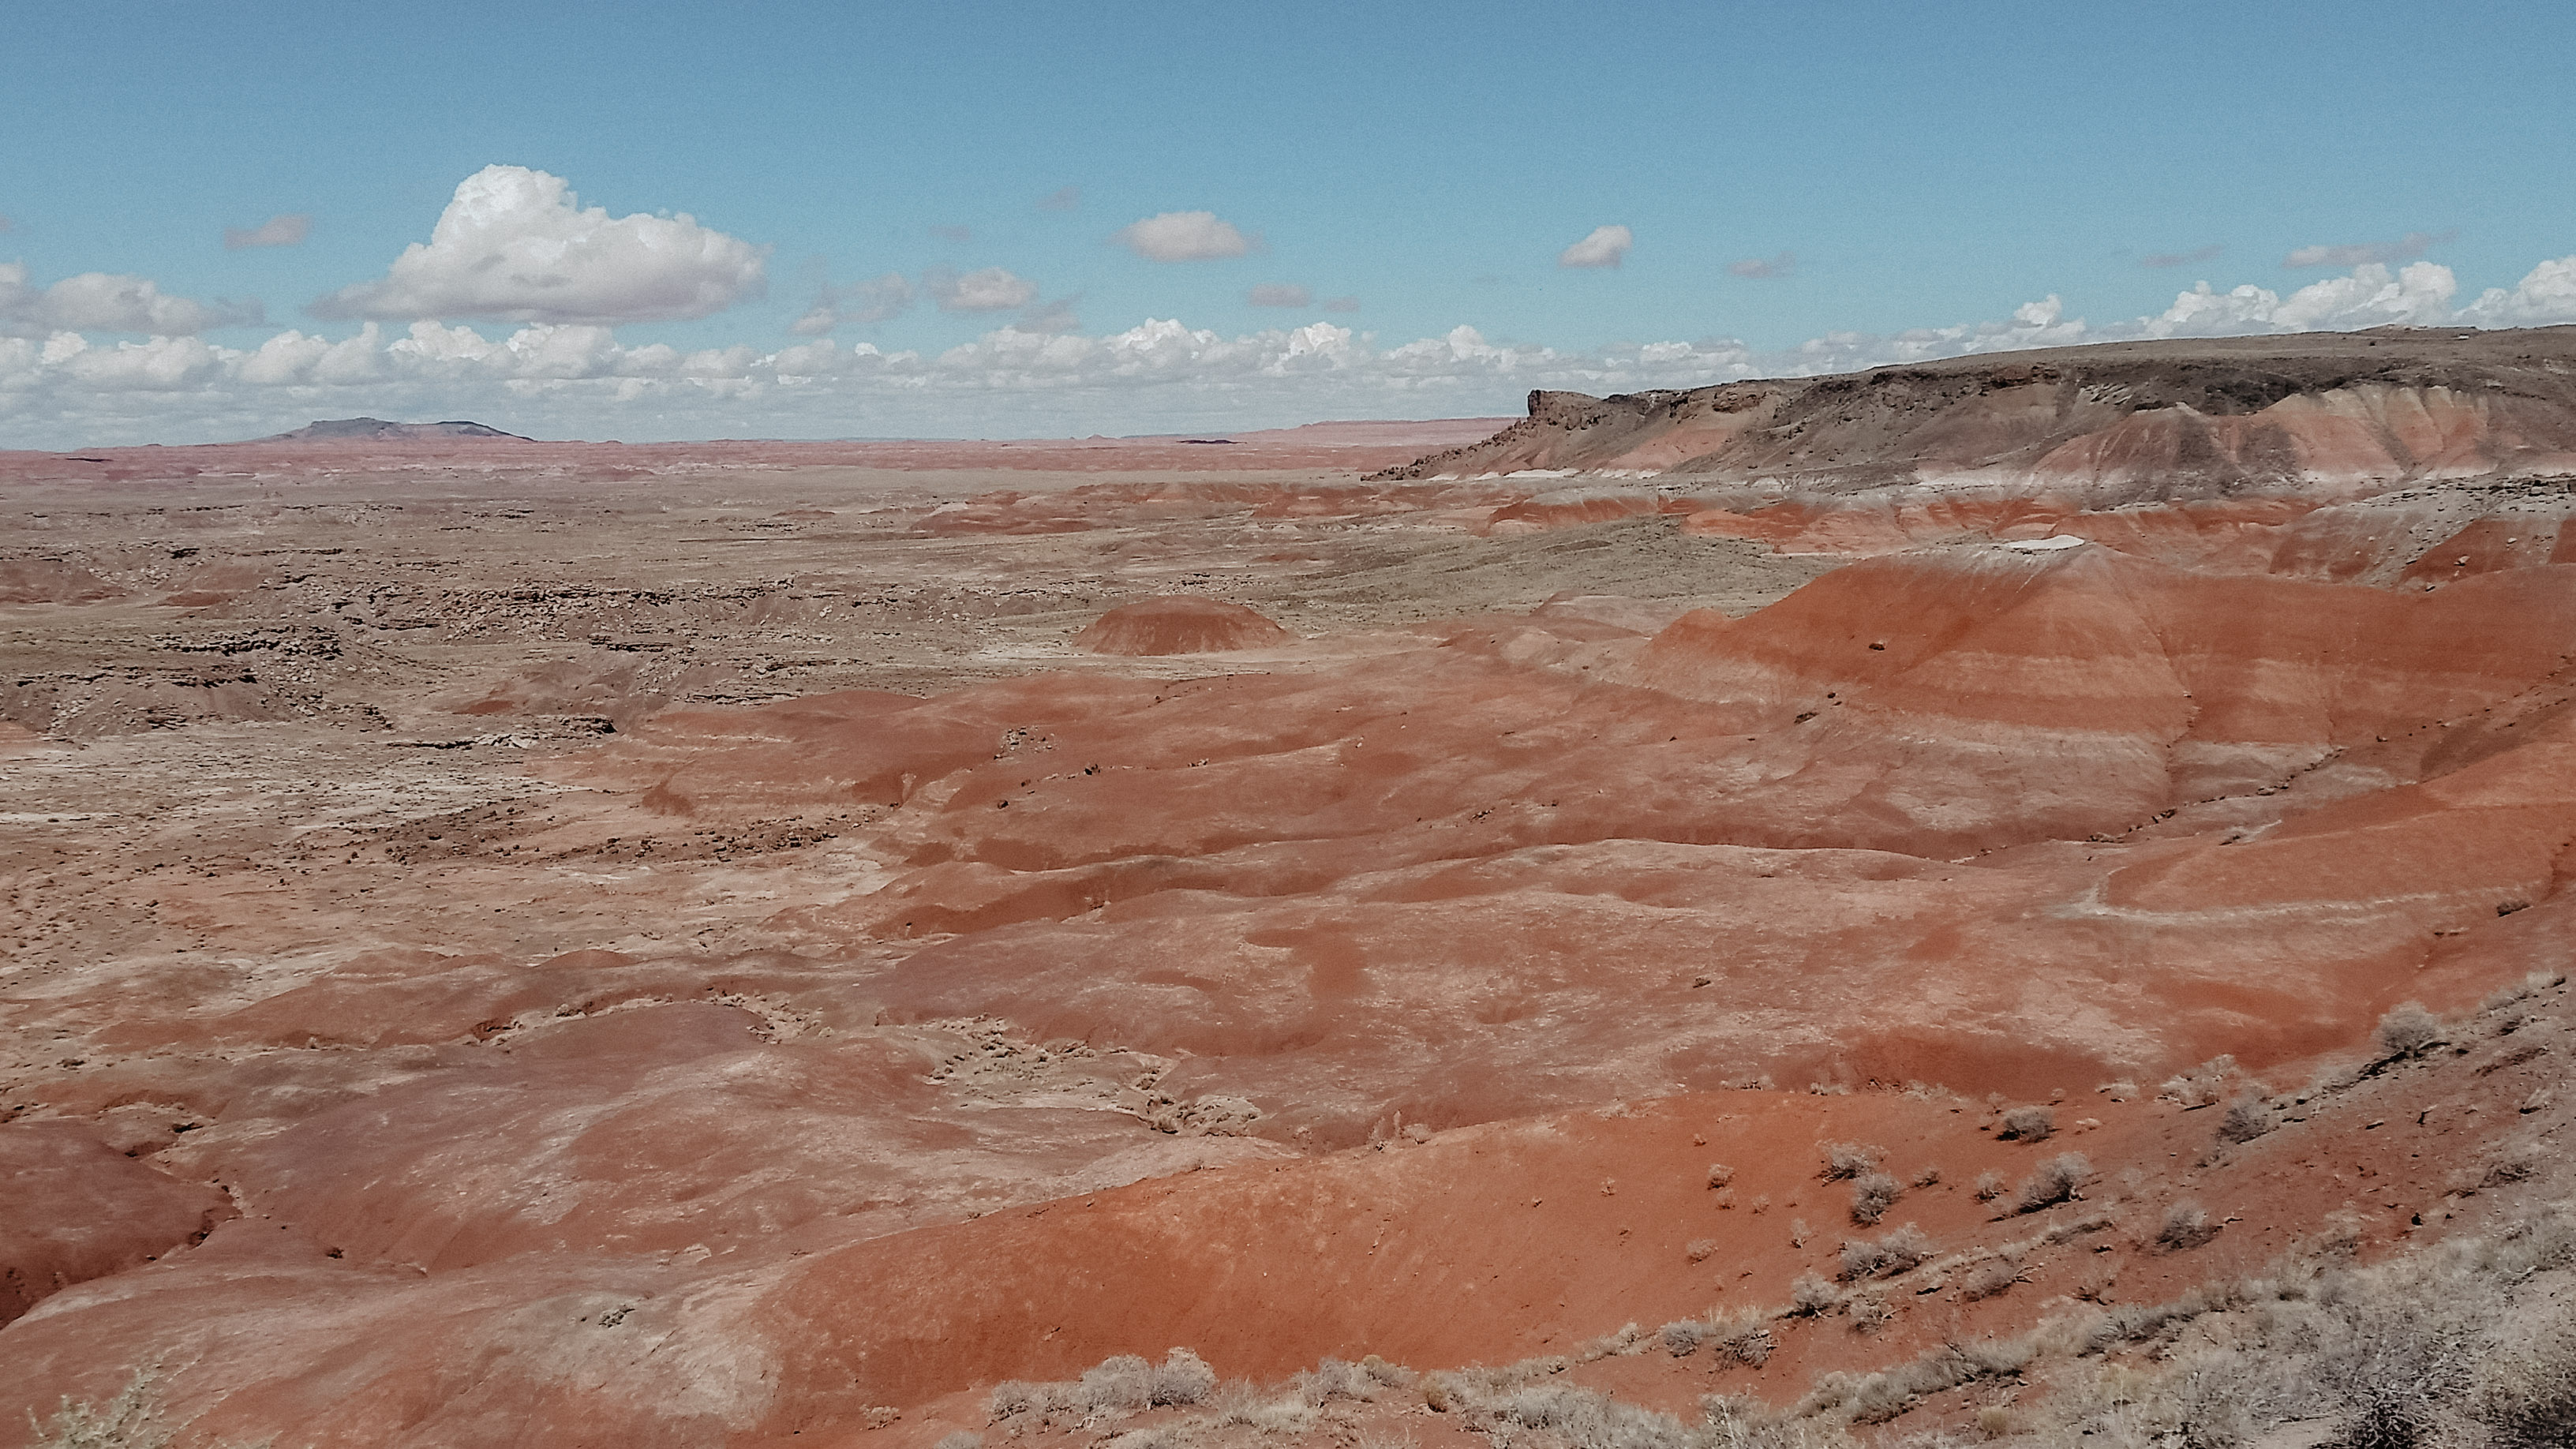 Bright Red Colored sand as far as you can see.  There are stripes of darker and lighter red, but the entire ground is red.  The sky is bright blue and it is a clear day at this National Park on Route 66. 